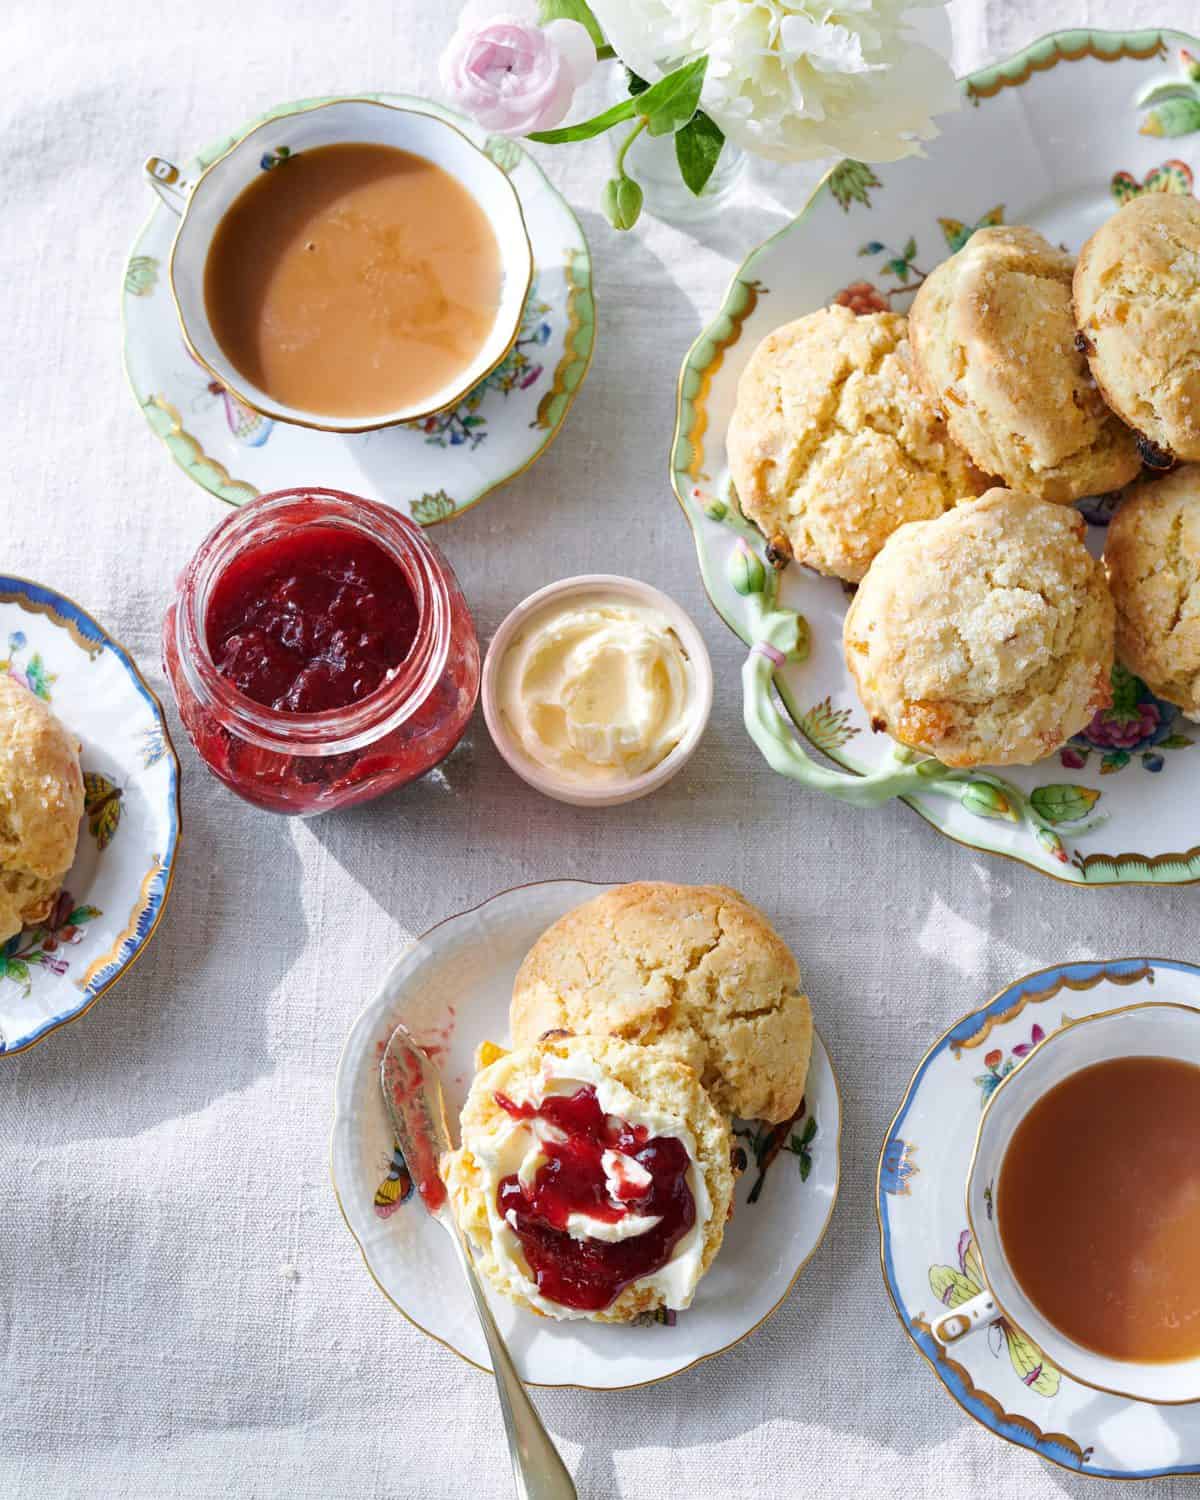 A group of cream scones with strawberry jam and clotted cream on a serving platter.